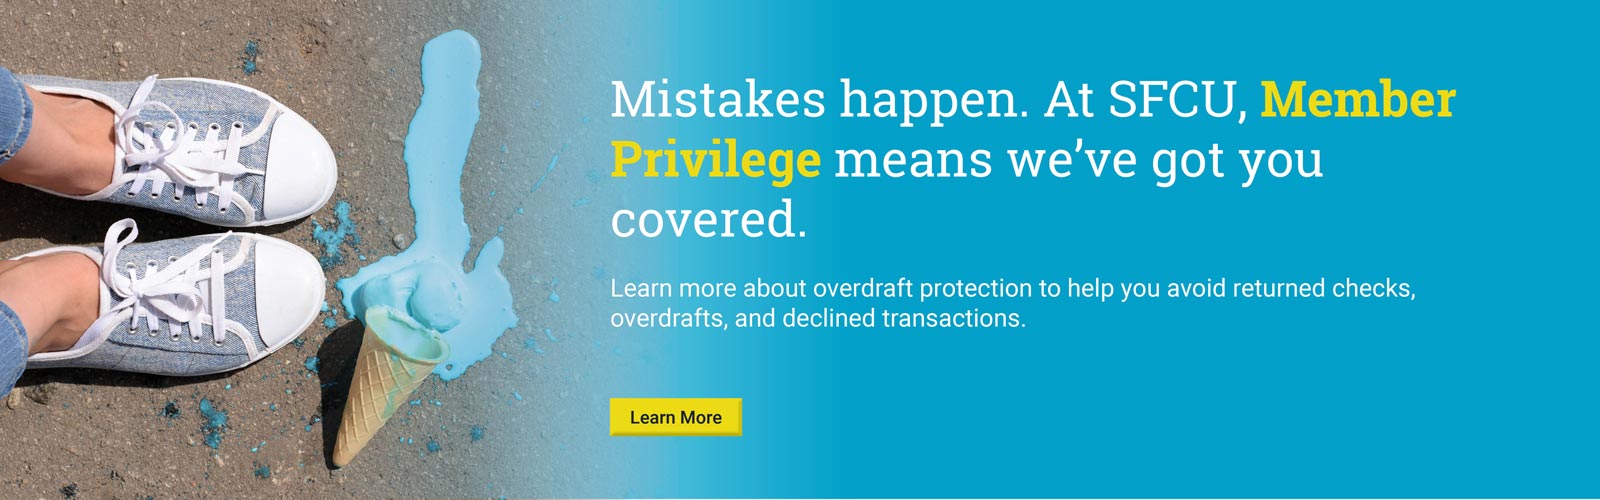 Mistakes happen. At SFCU, Member Privilege means we've got you covered.

Click below to learn about overdraft protection